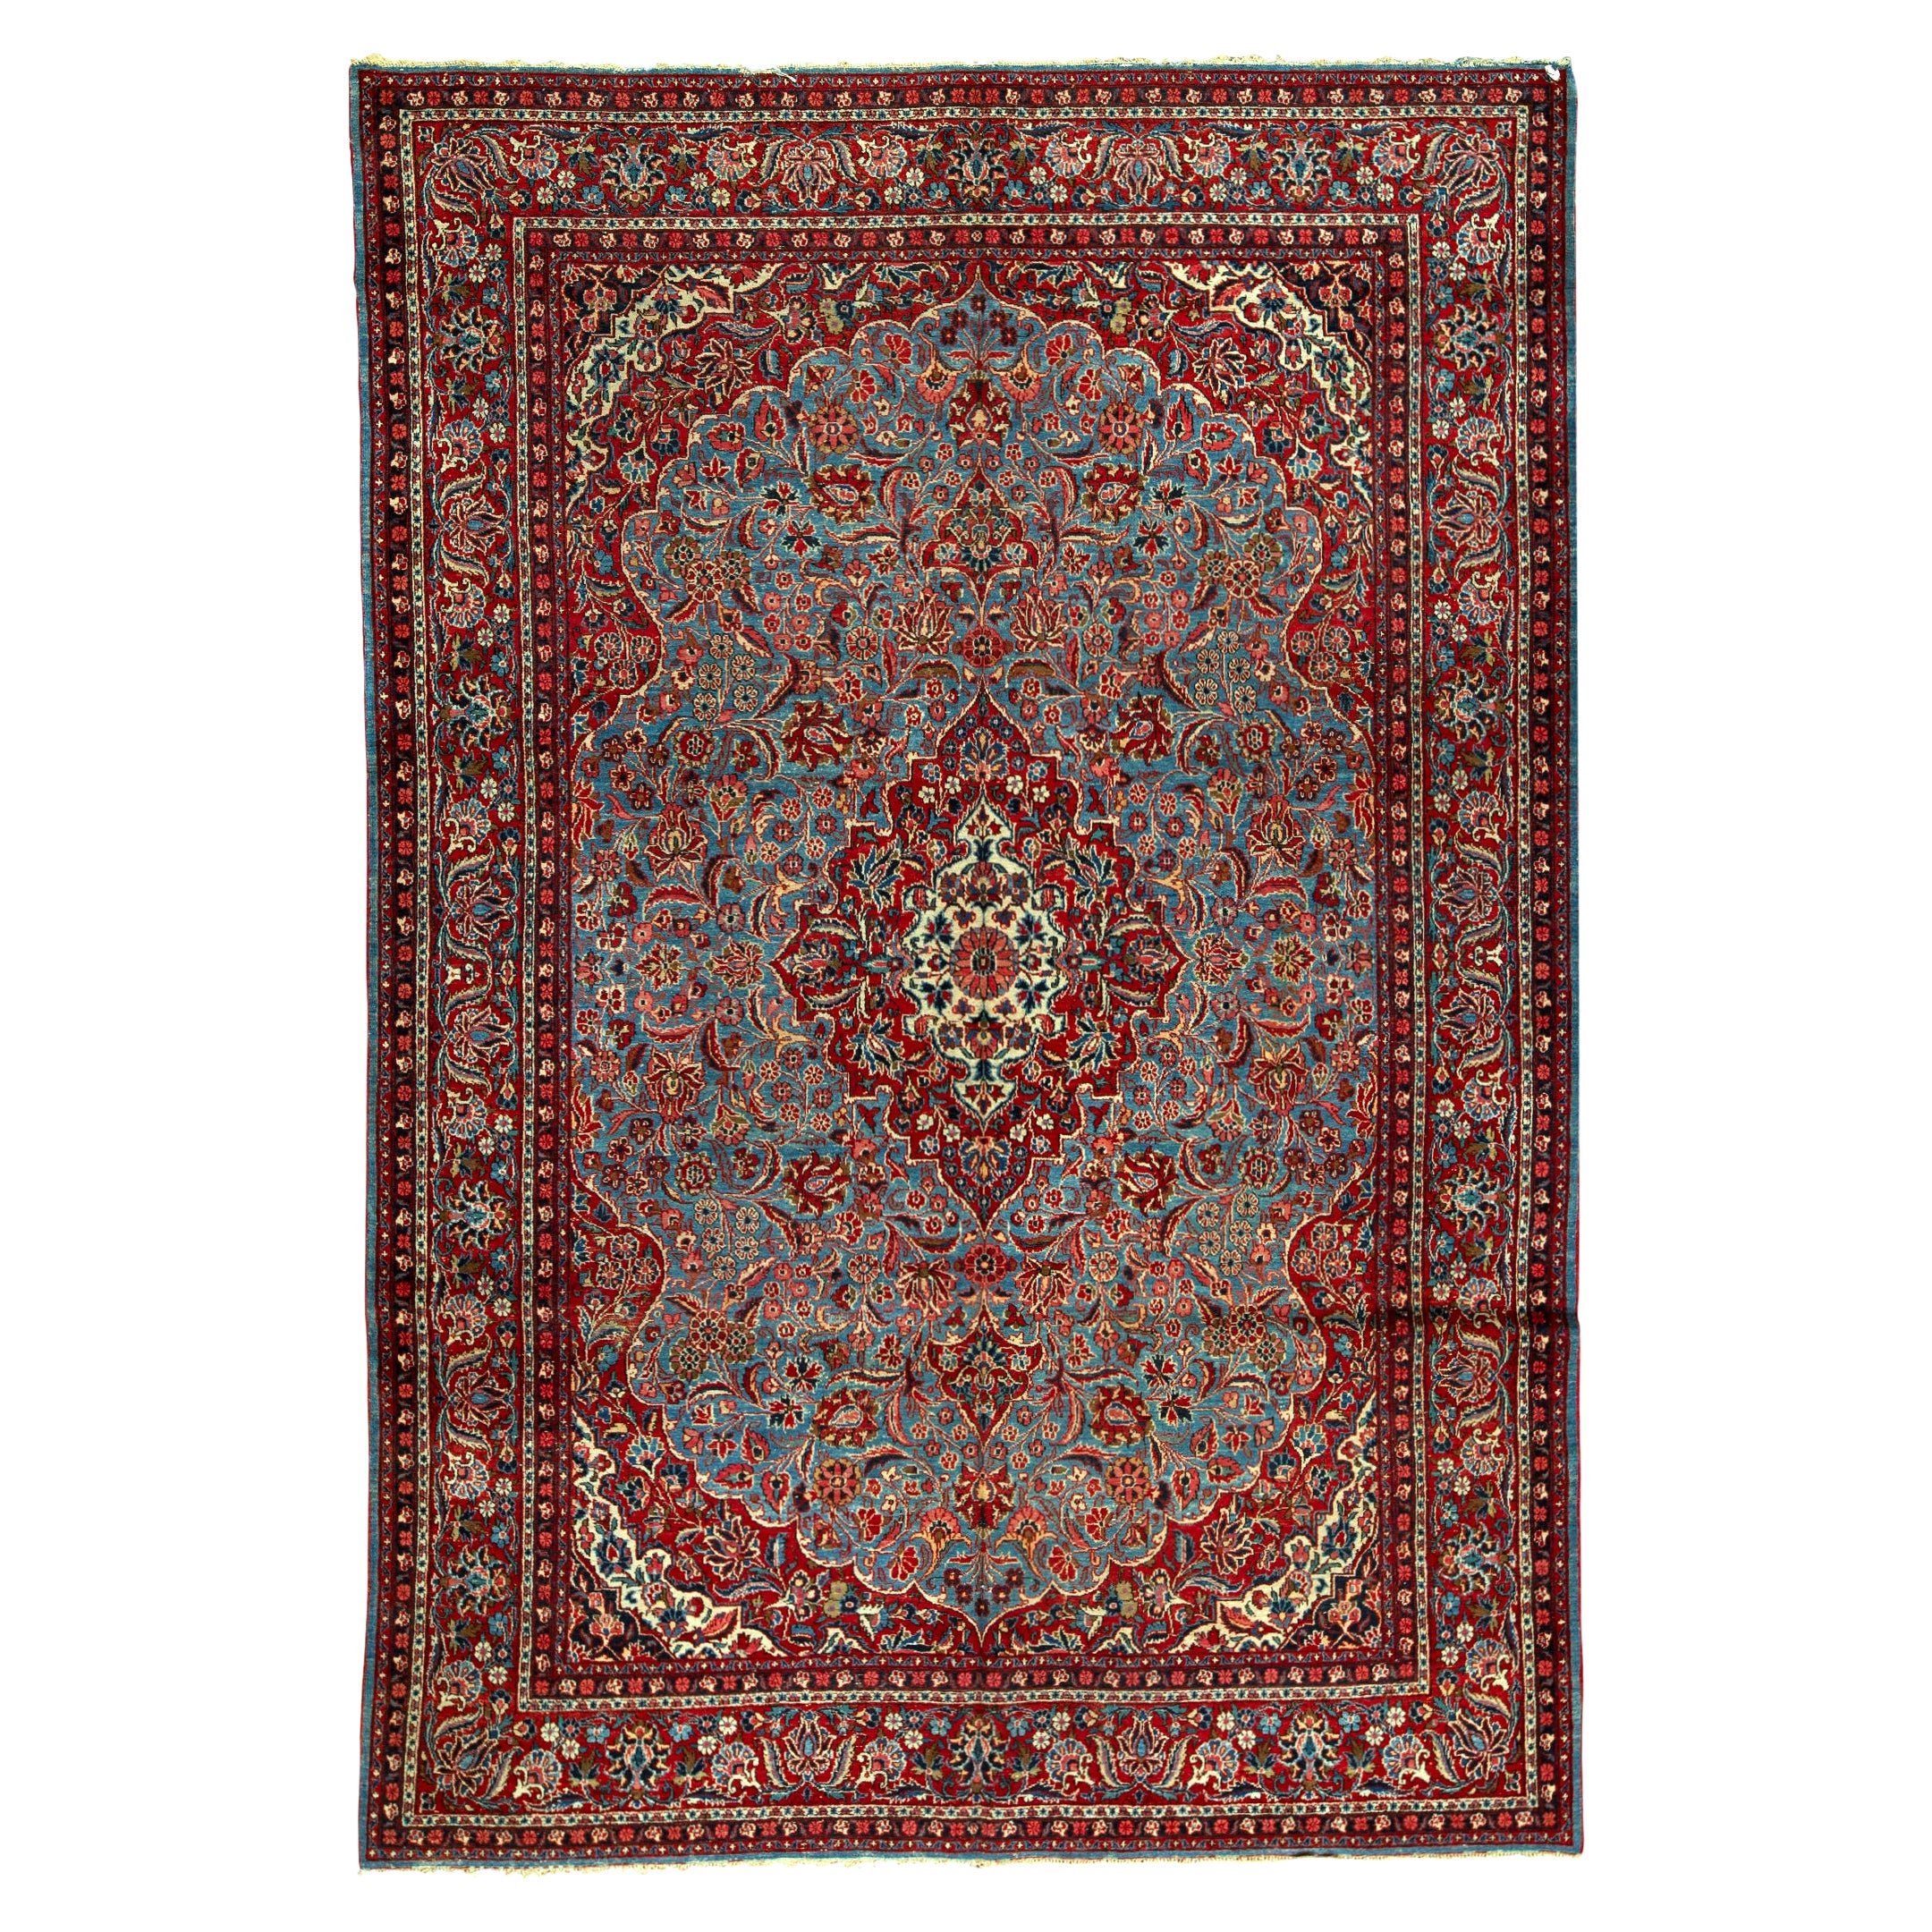   Antique Persian Fine Traditional Handwoven Luxury Wool Blue / Red Rug